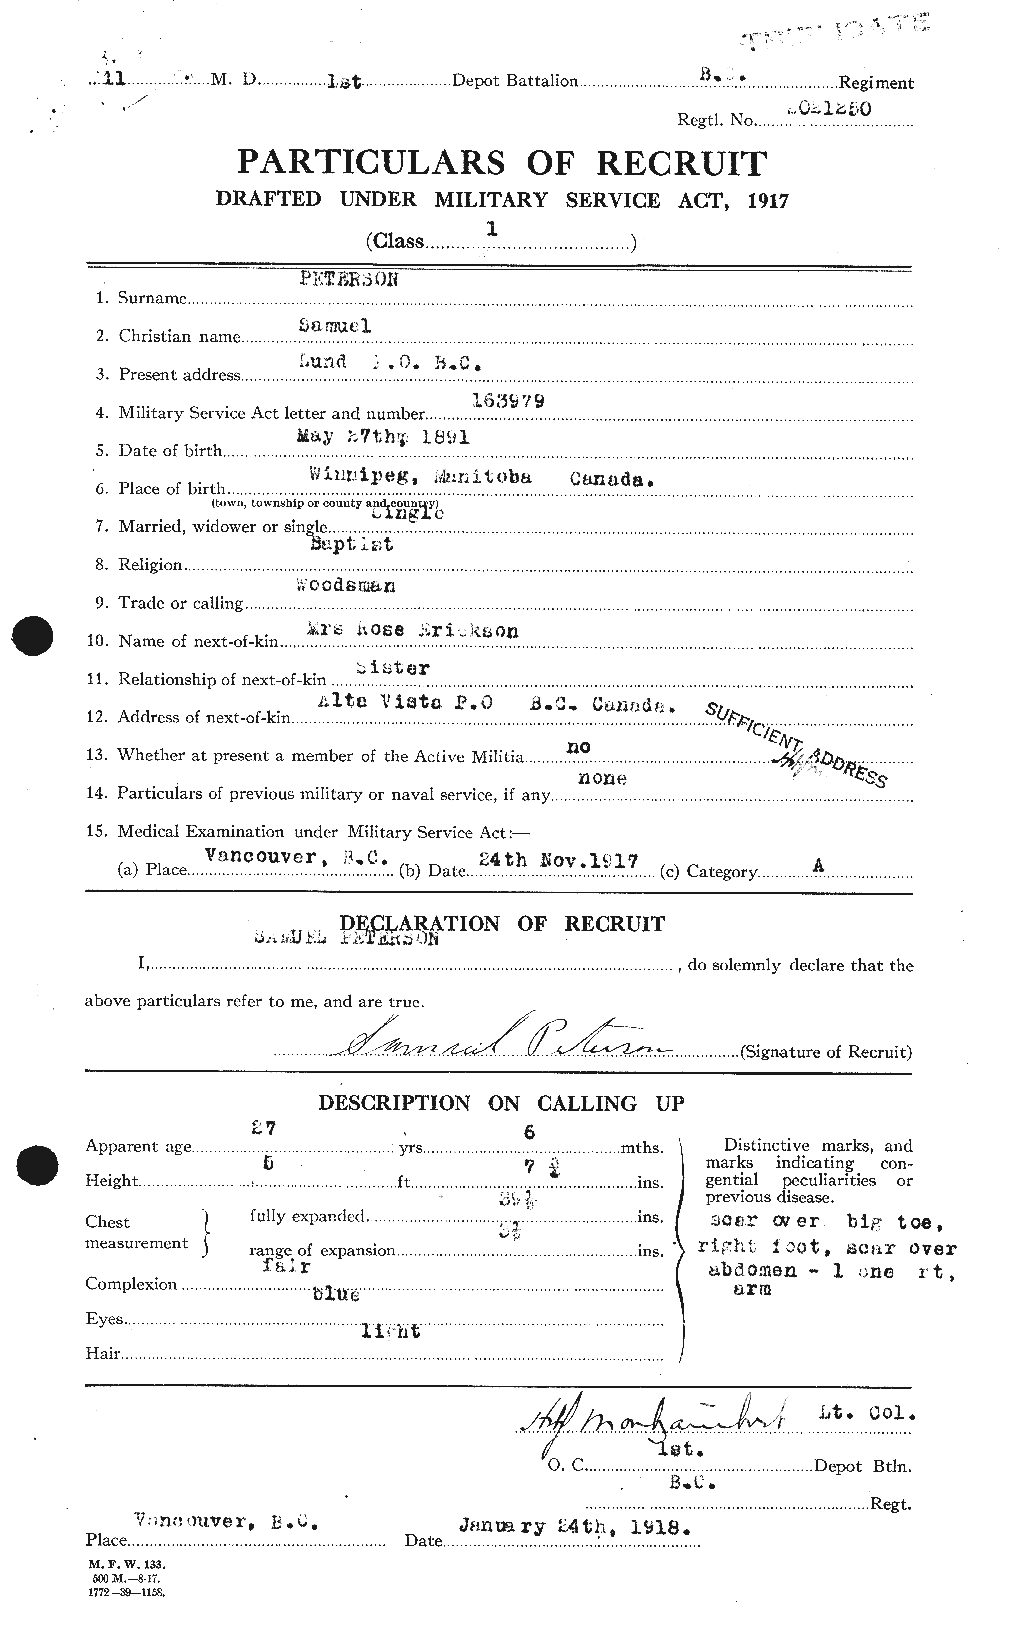 Personnel Records of the First World War - CEF 576050a